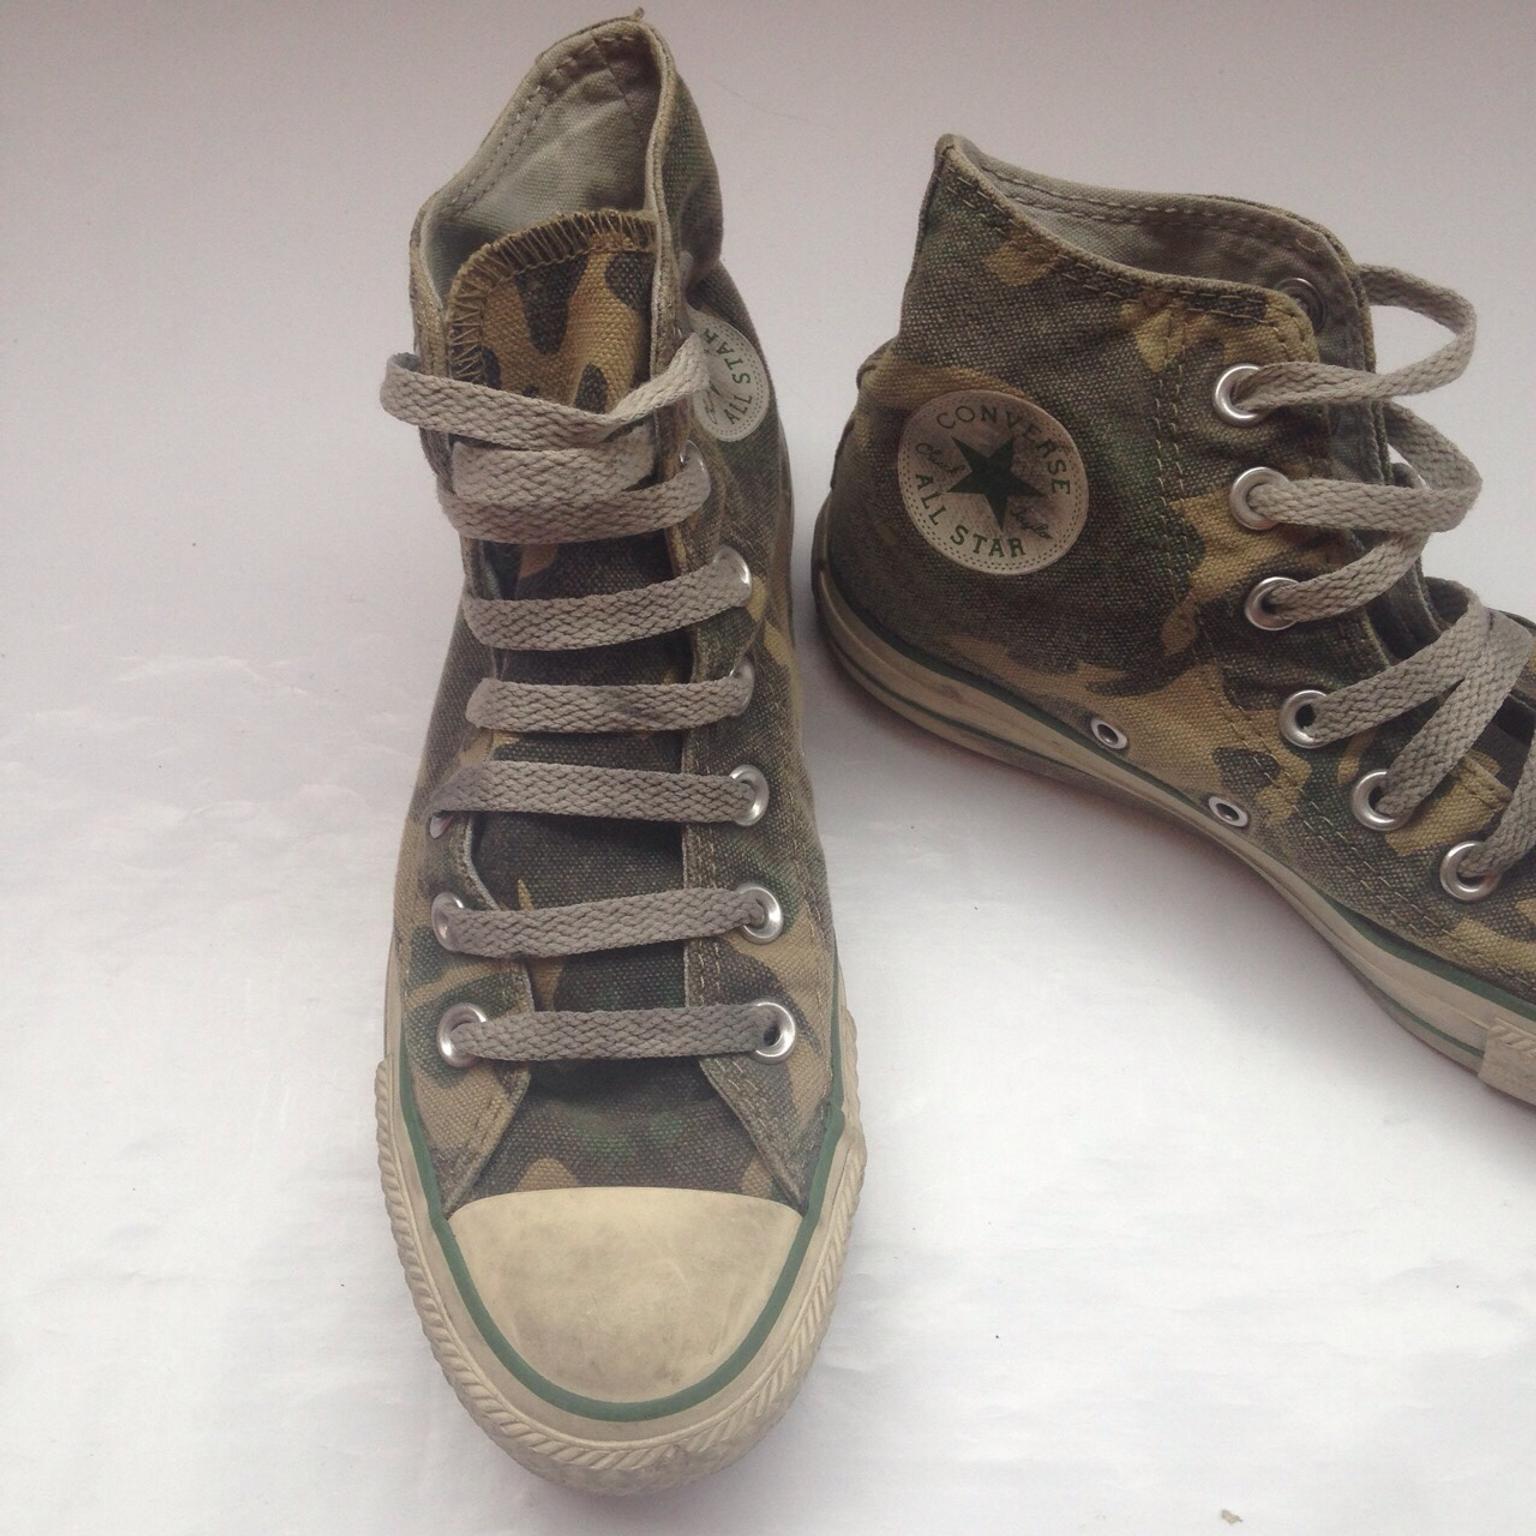 Converse limited edition militari in 35133 Cadoneghe for €130.00 for sale |  Shpock